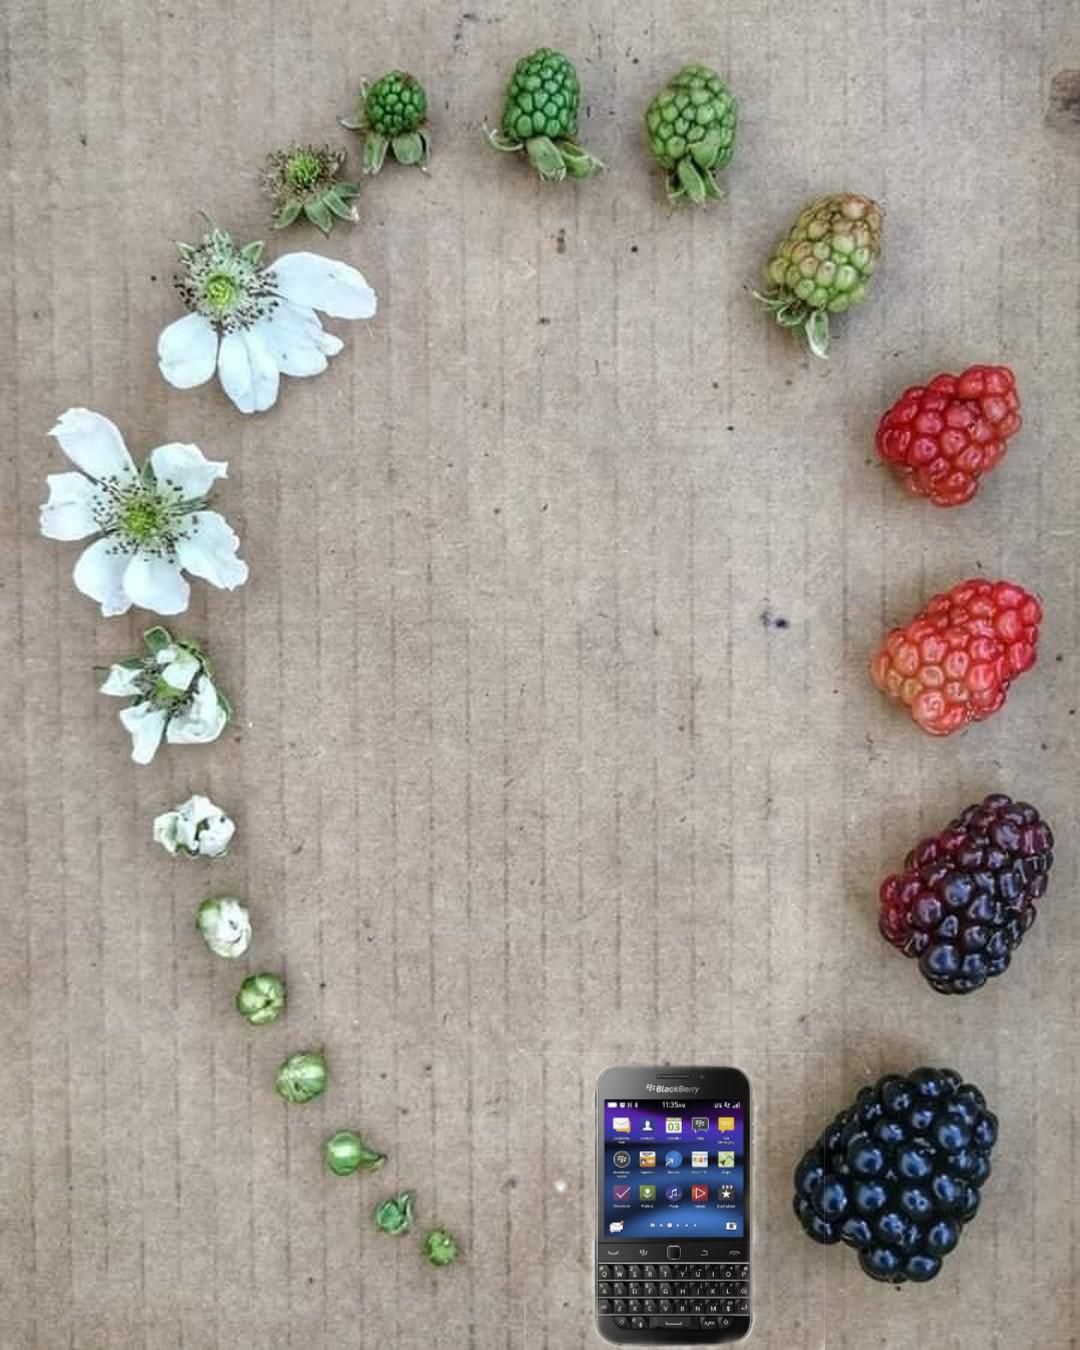 Life cycle of a blackberry